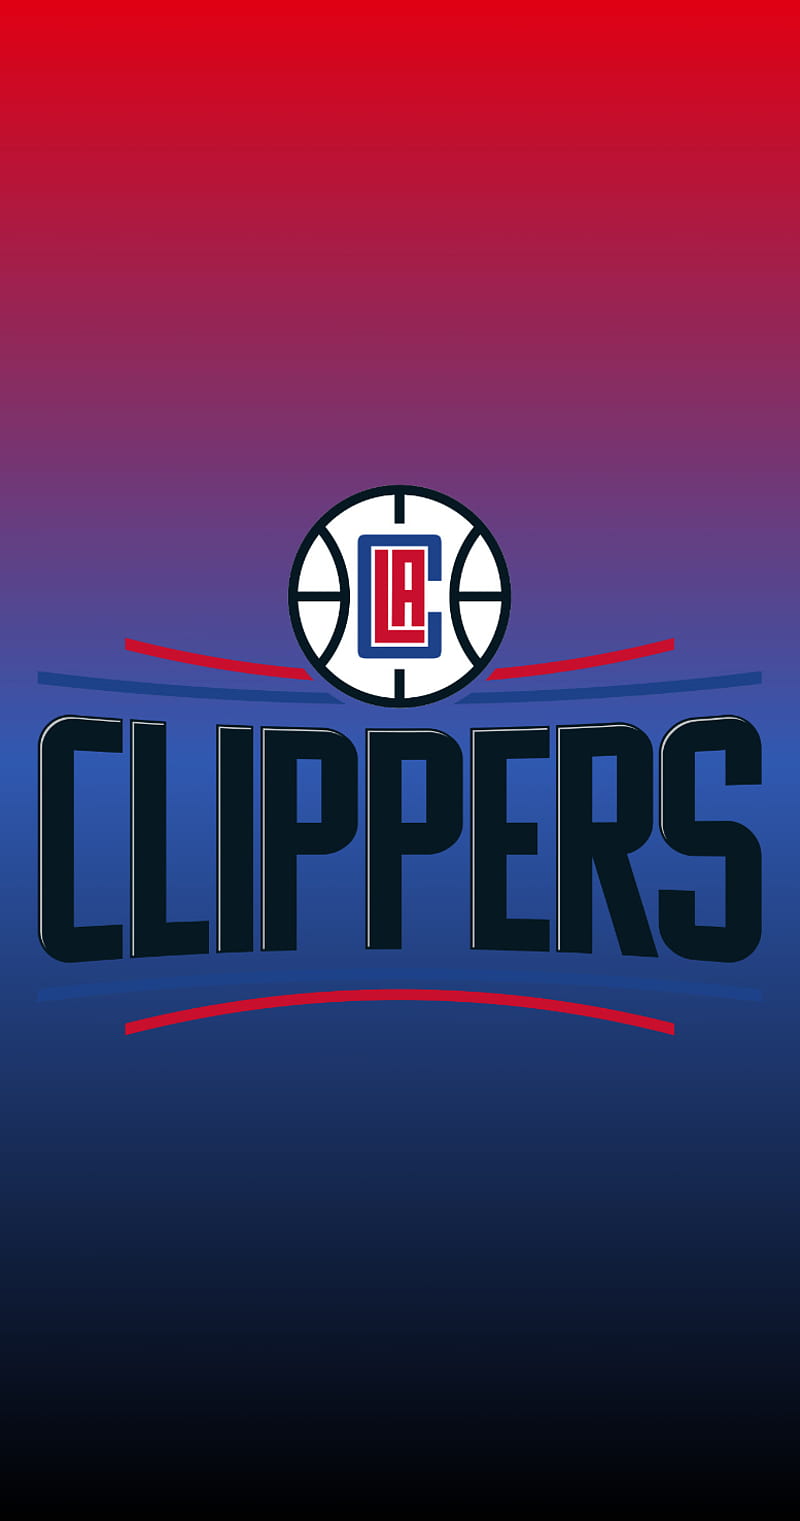 Los Angeles Clippers HD Wallpaper